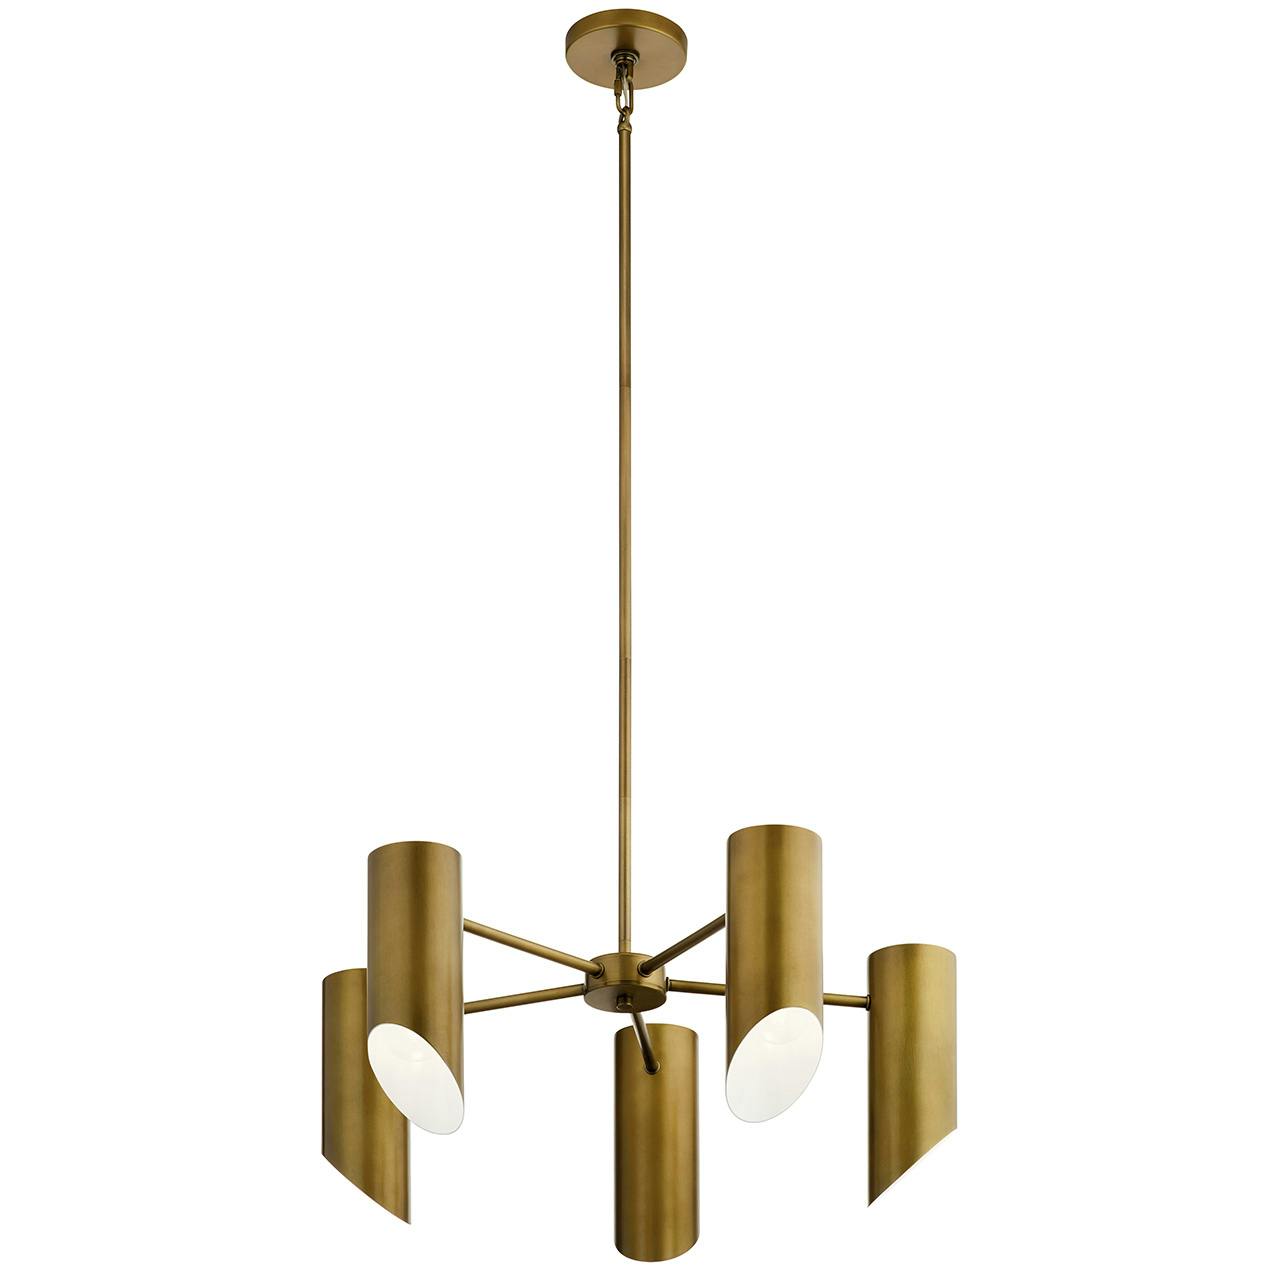 Trentino 5 Light Chandelier Natural Brass on a white background